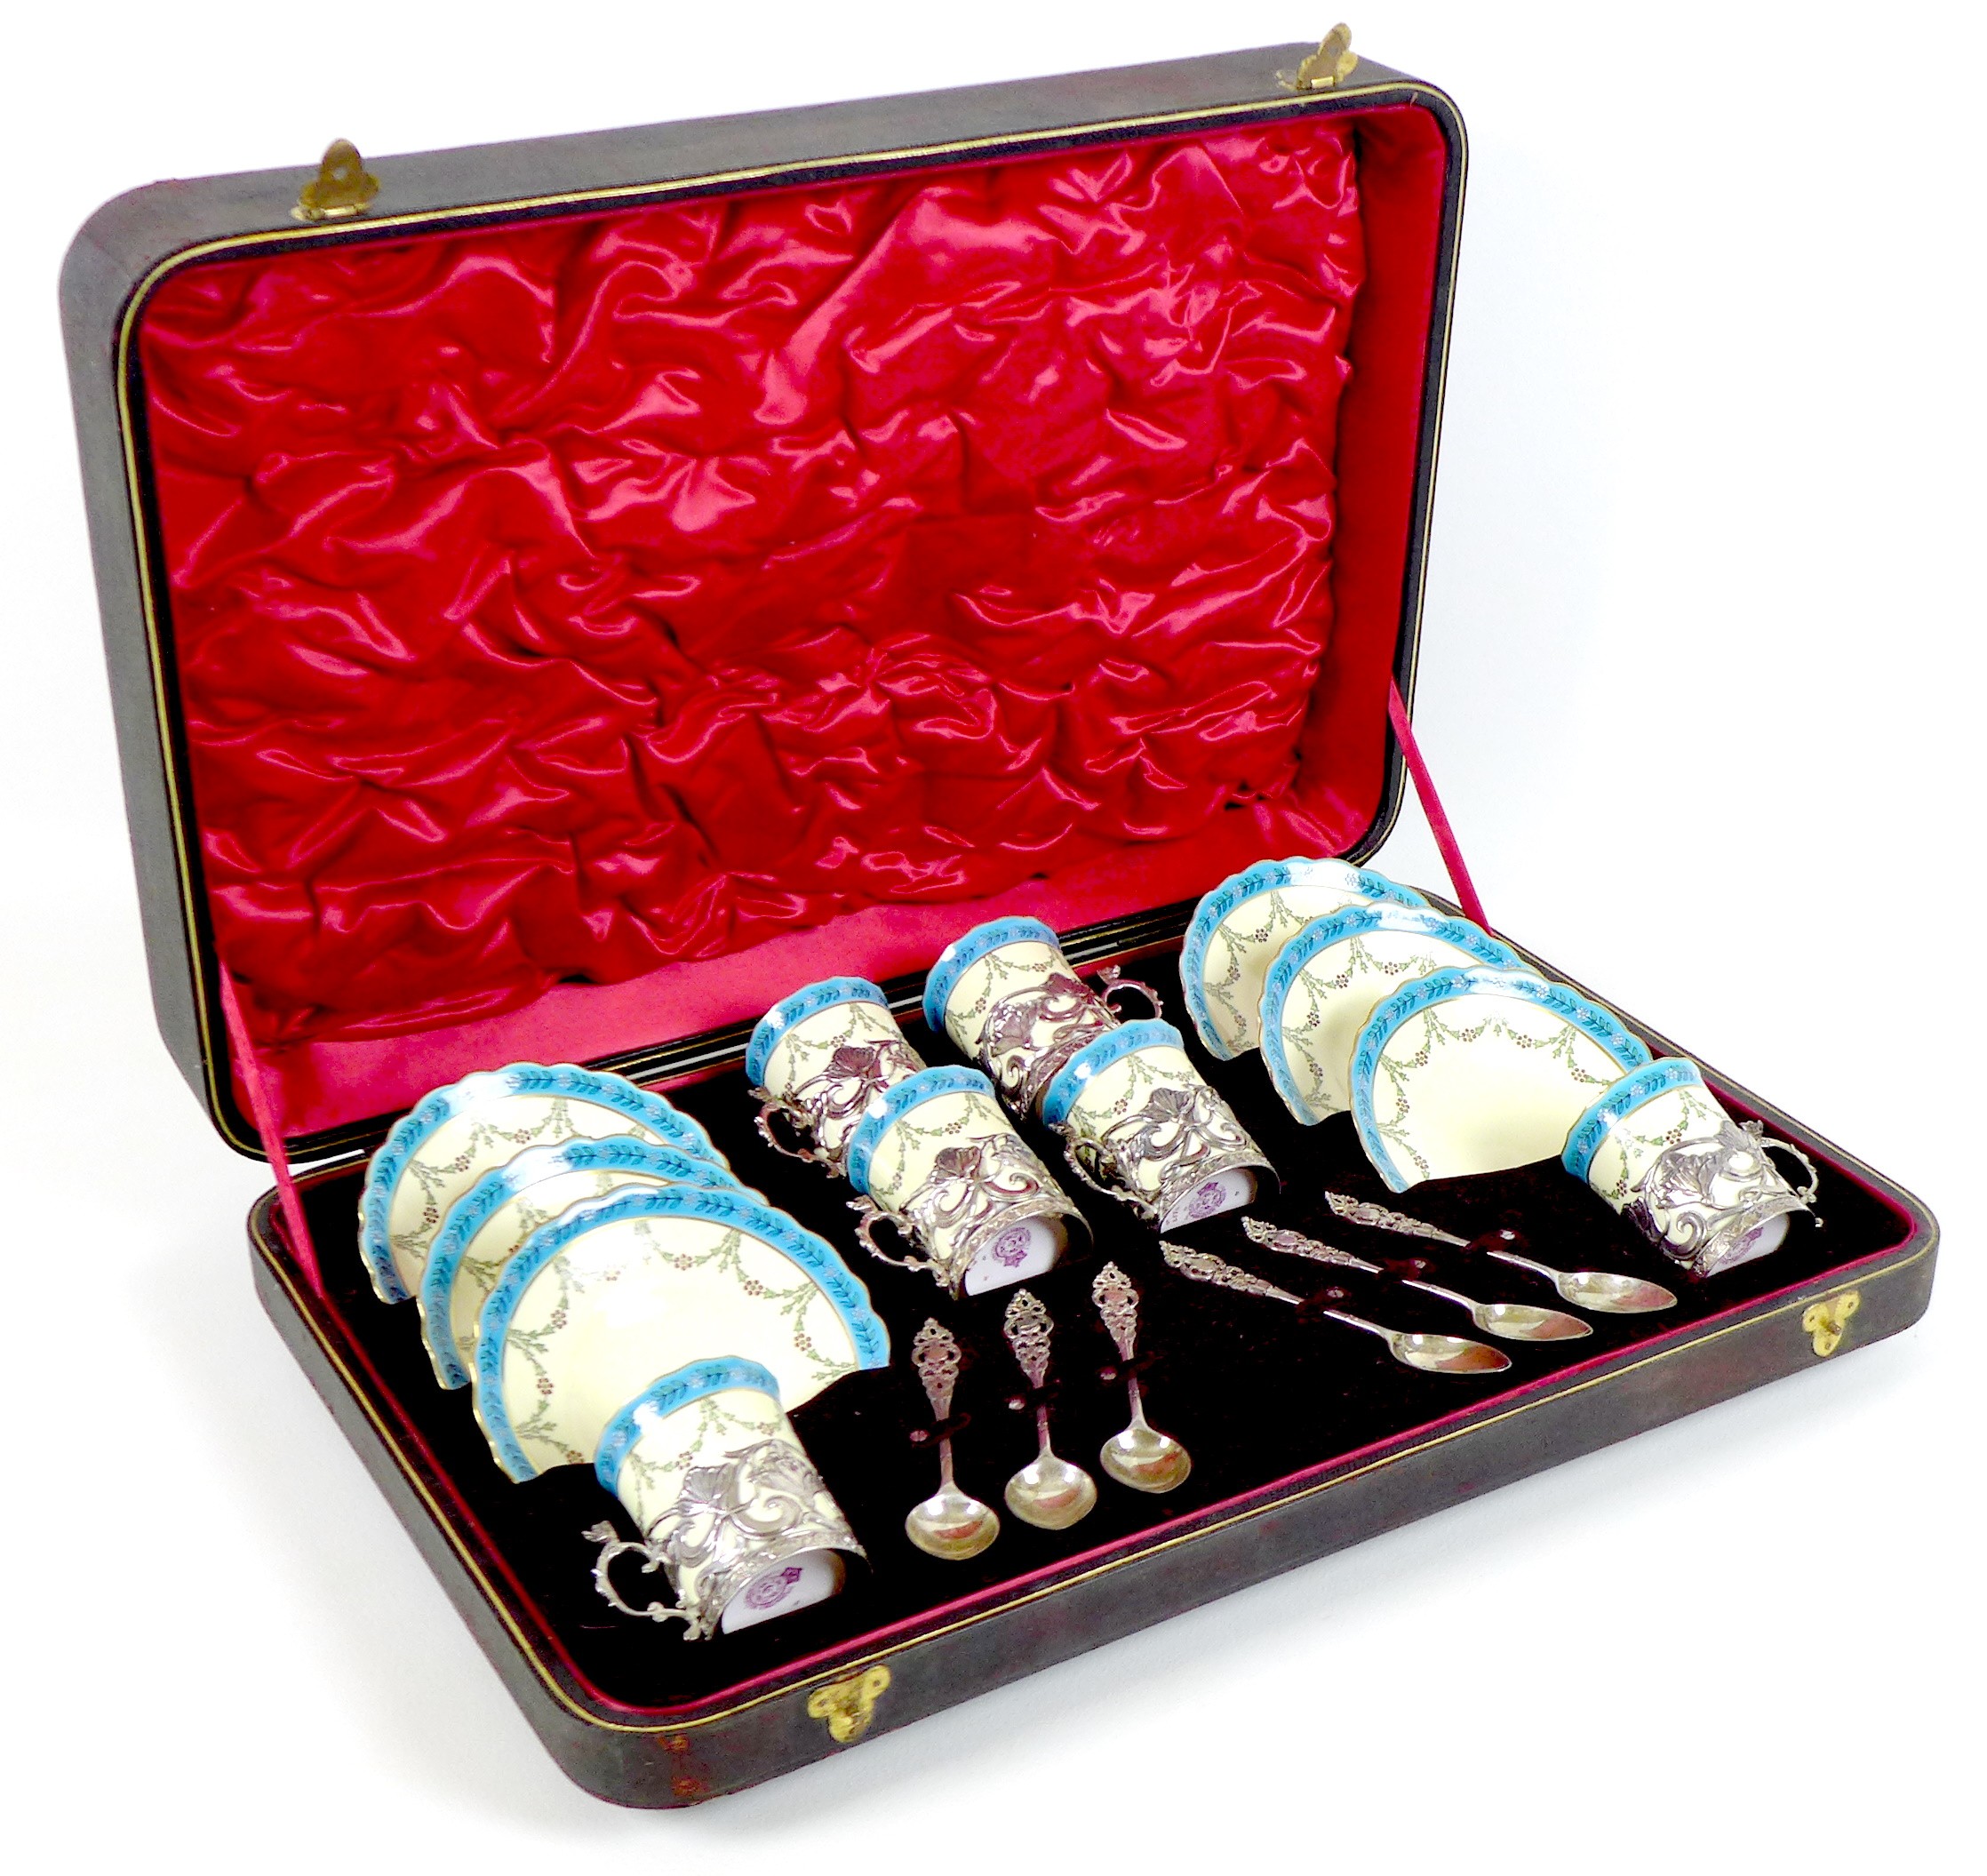 An Edwardian Royal Worcester porcelain and silver mounted coffee set, dated 1904, with scalloped